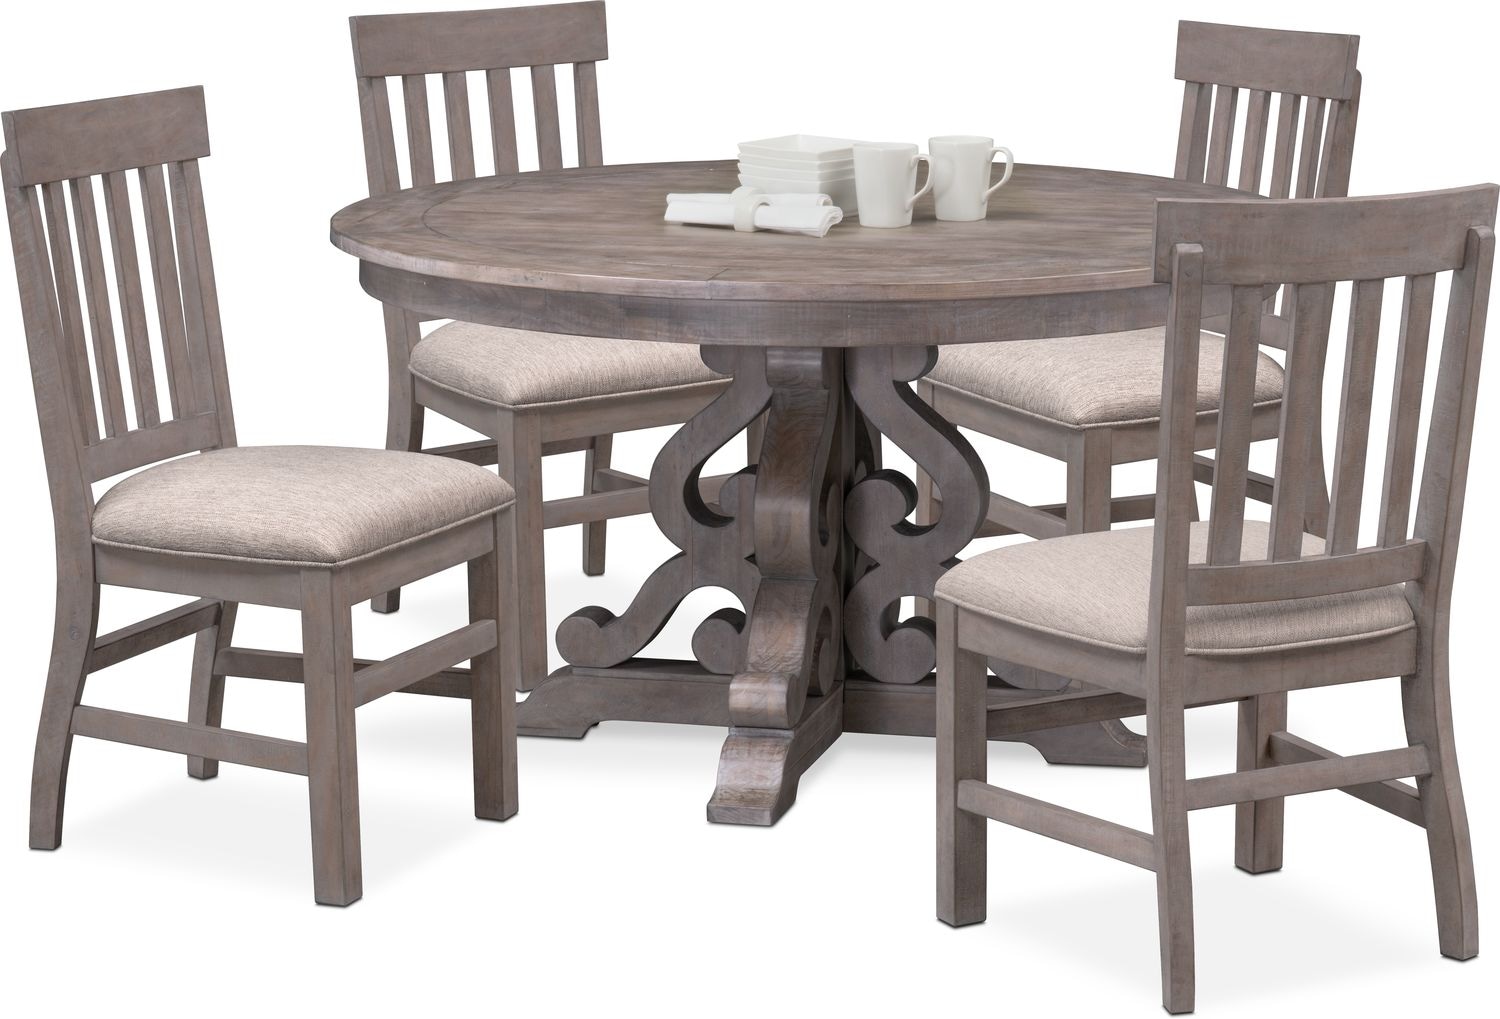 Charthouse Round Dining Table And 4 Side Chairs Value City